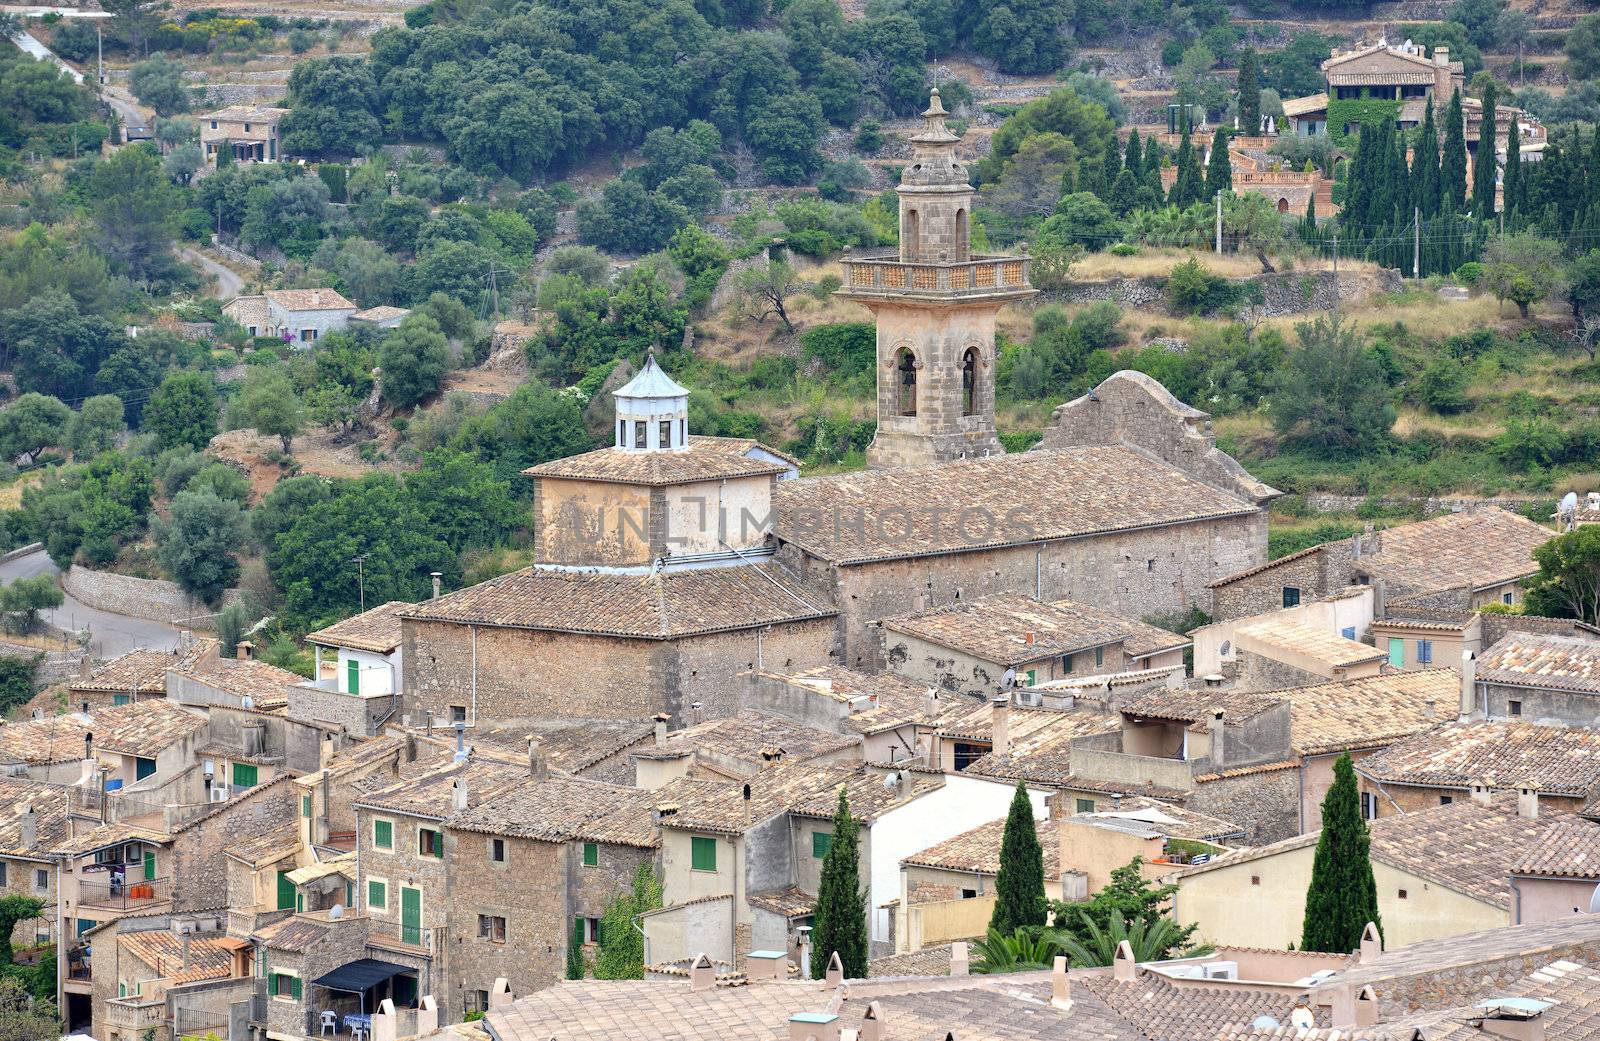 A View of Valldemossa in Mallorca, Spain ( Belearic Islands )